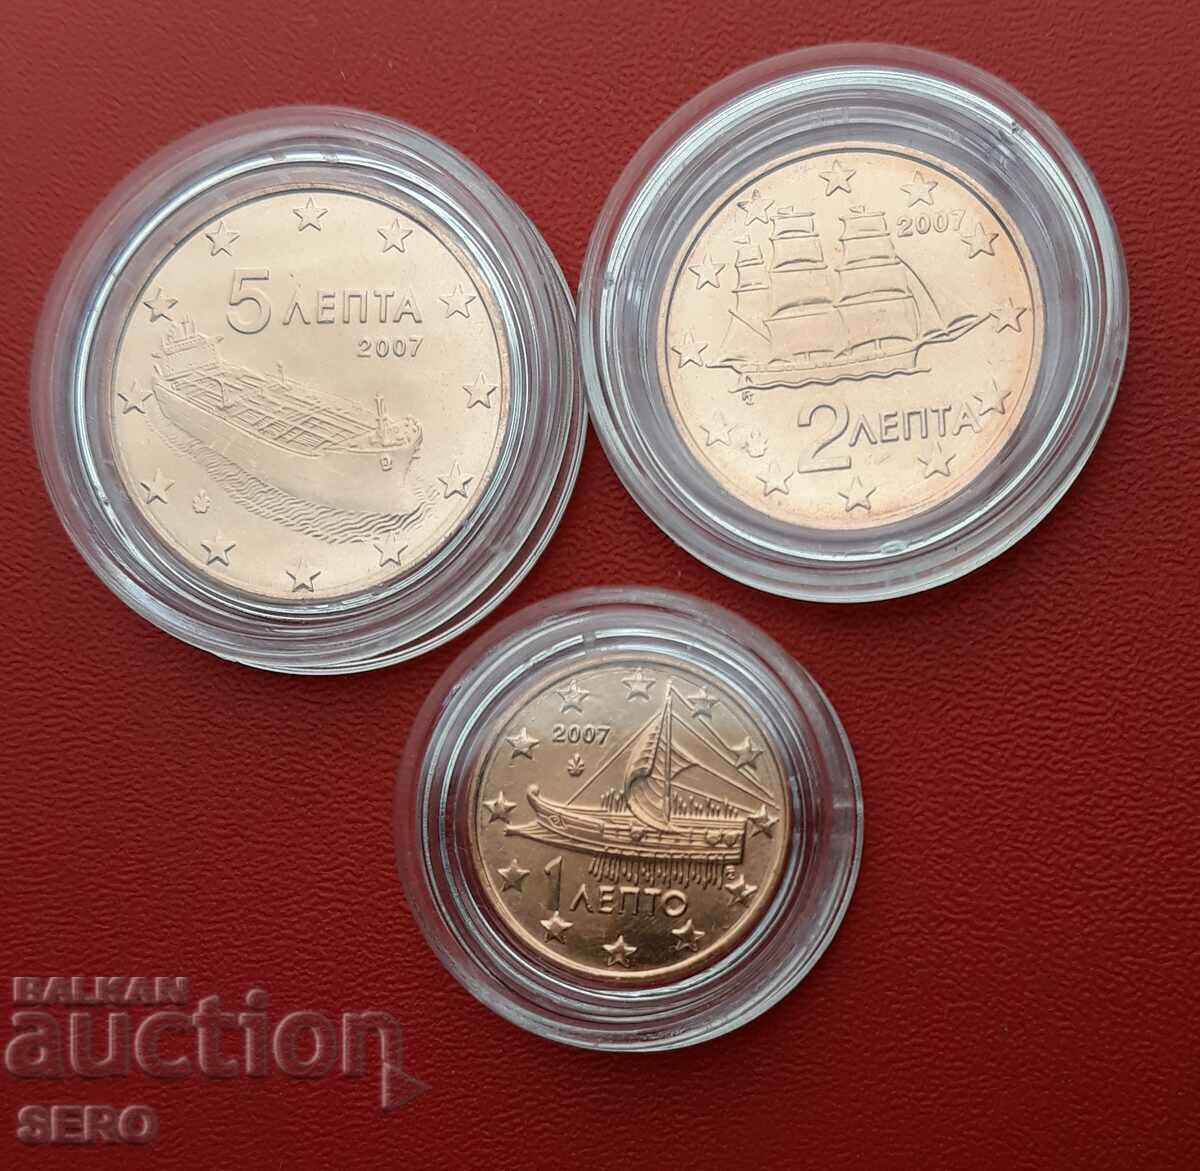 Greece-lot 3 euro coins 2007 in capsules